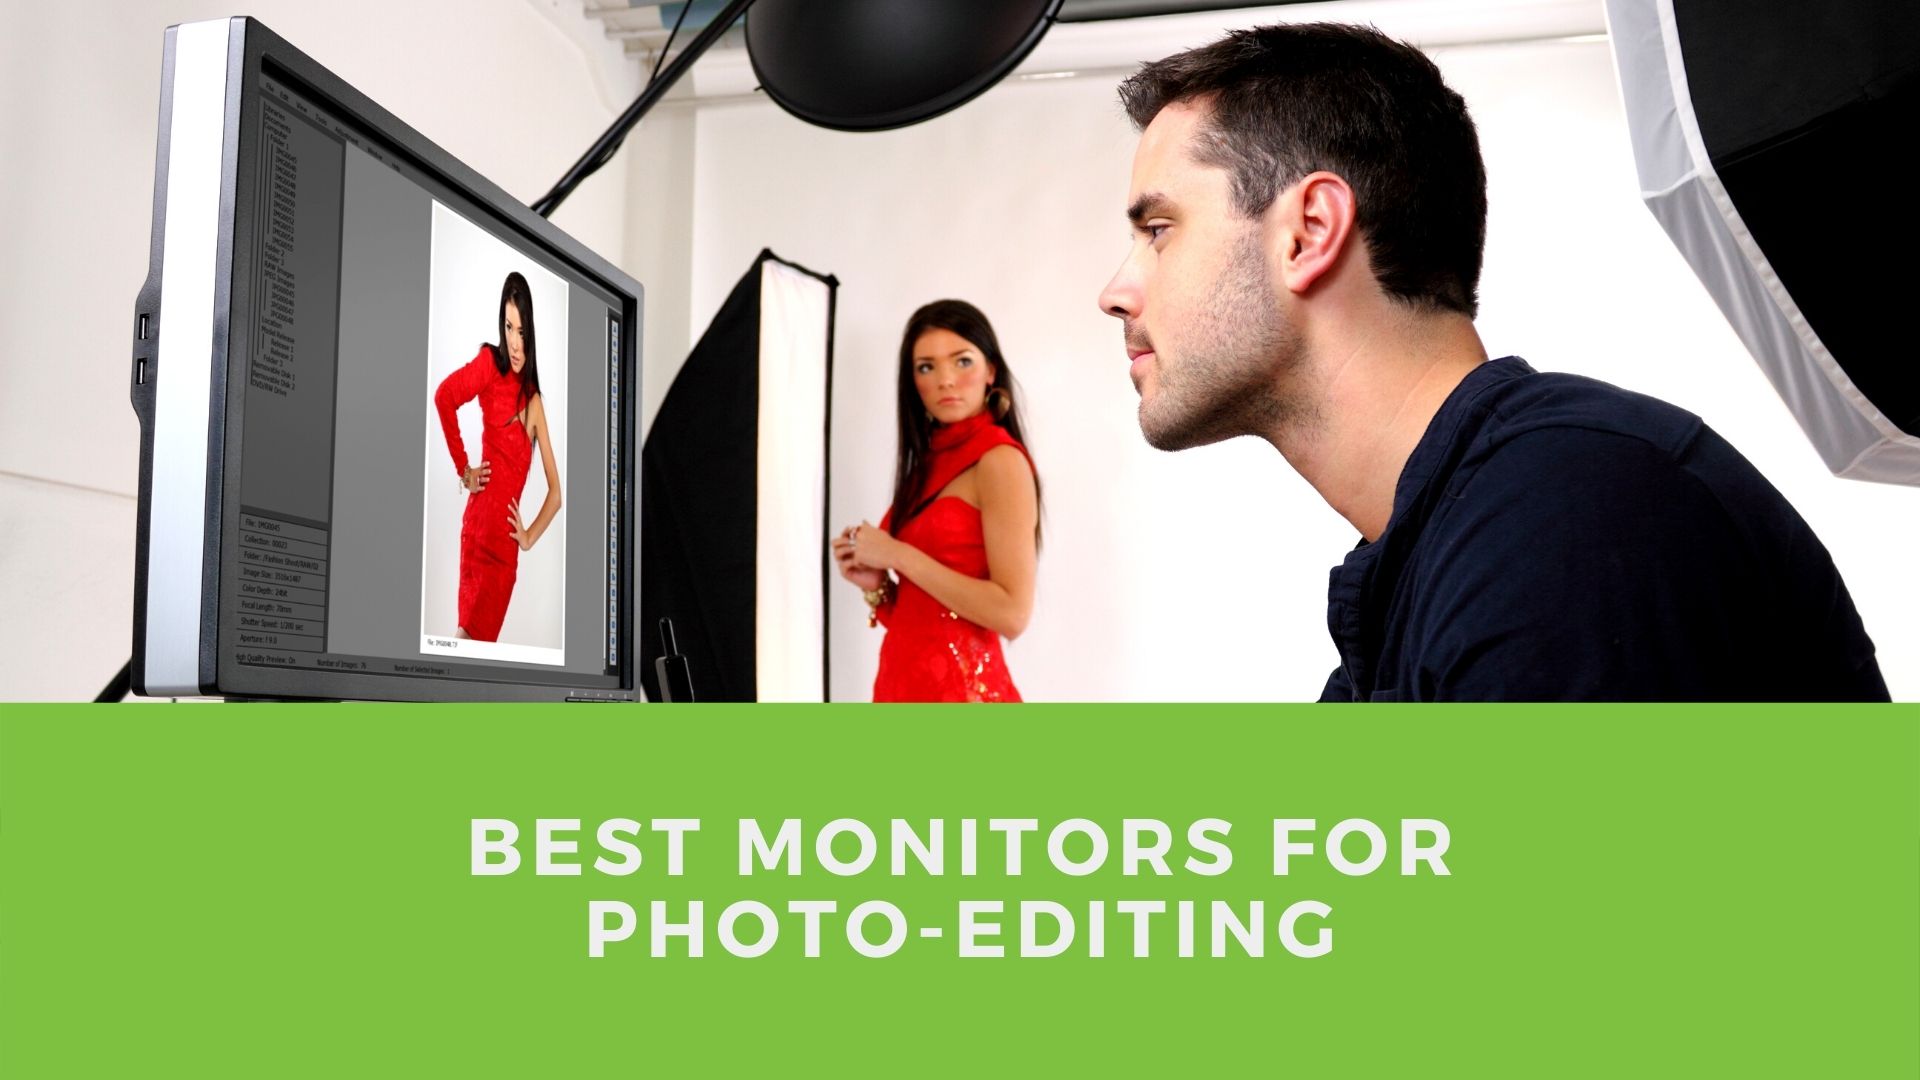 The Best Monitors for Photo Editing